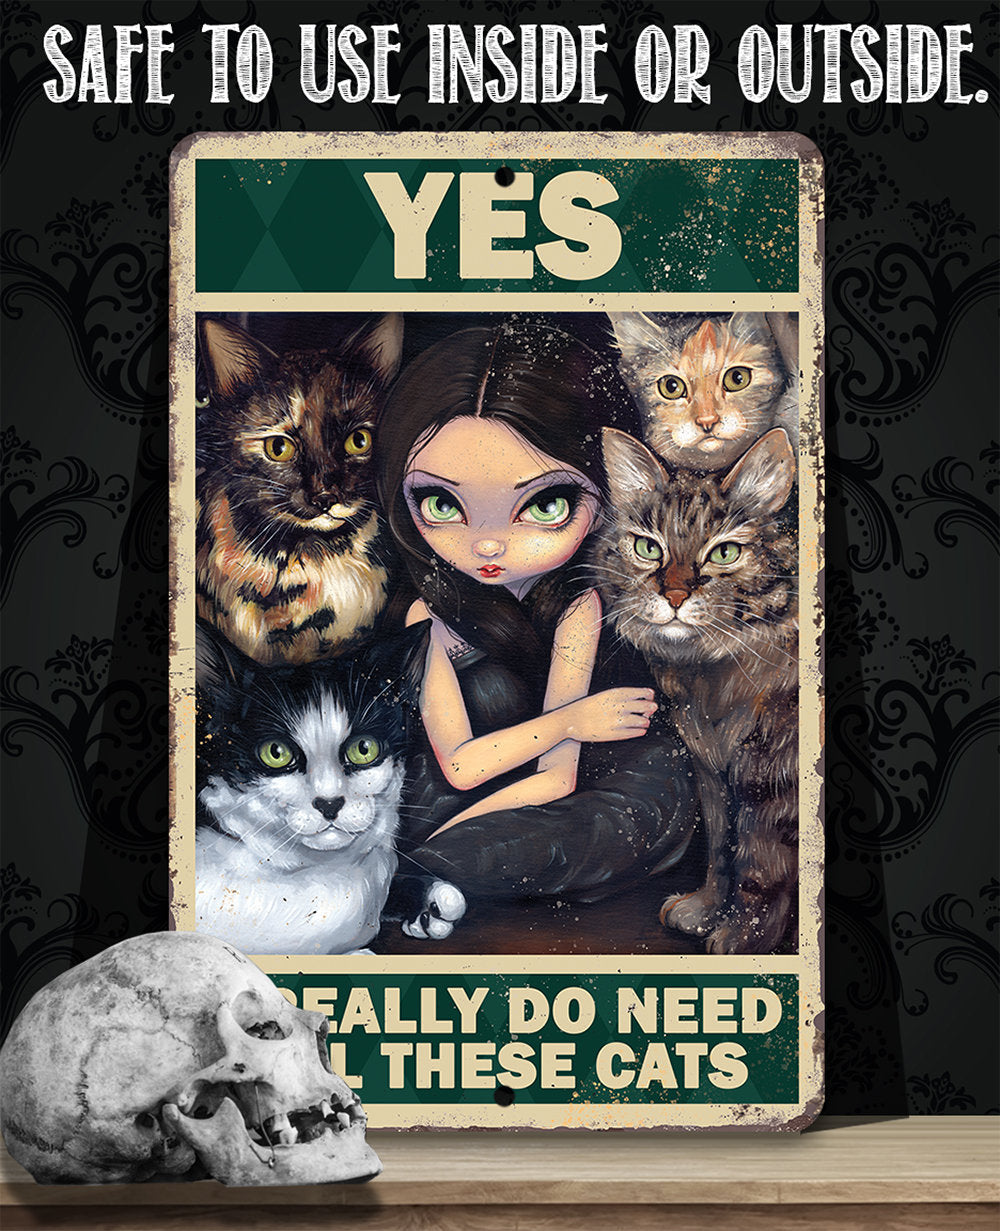 Yes I Really Do Need All These Cats - Metal Sign Metal Sign Lone Star Art 